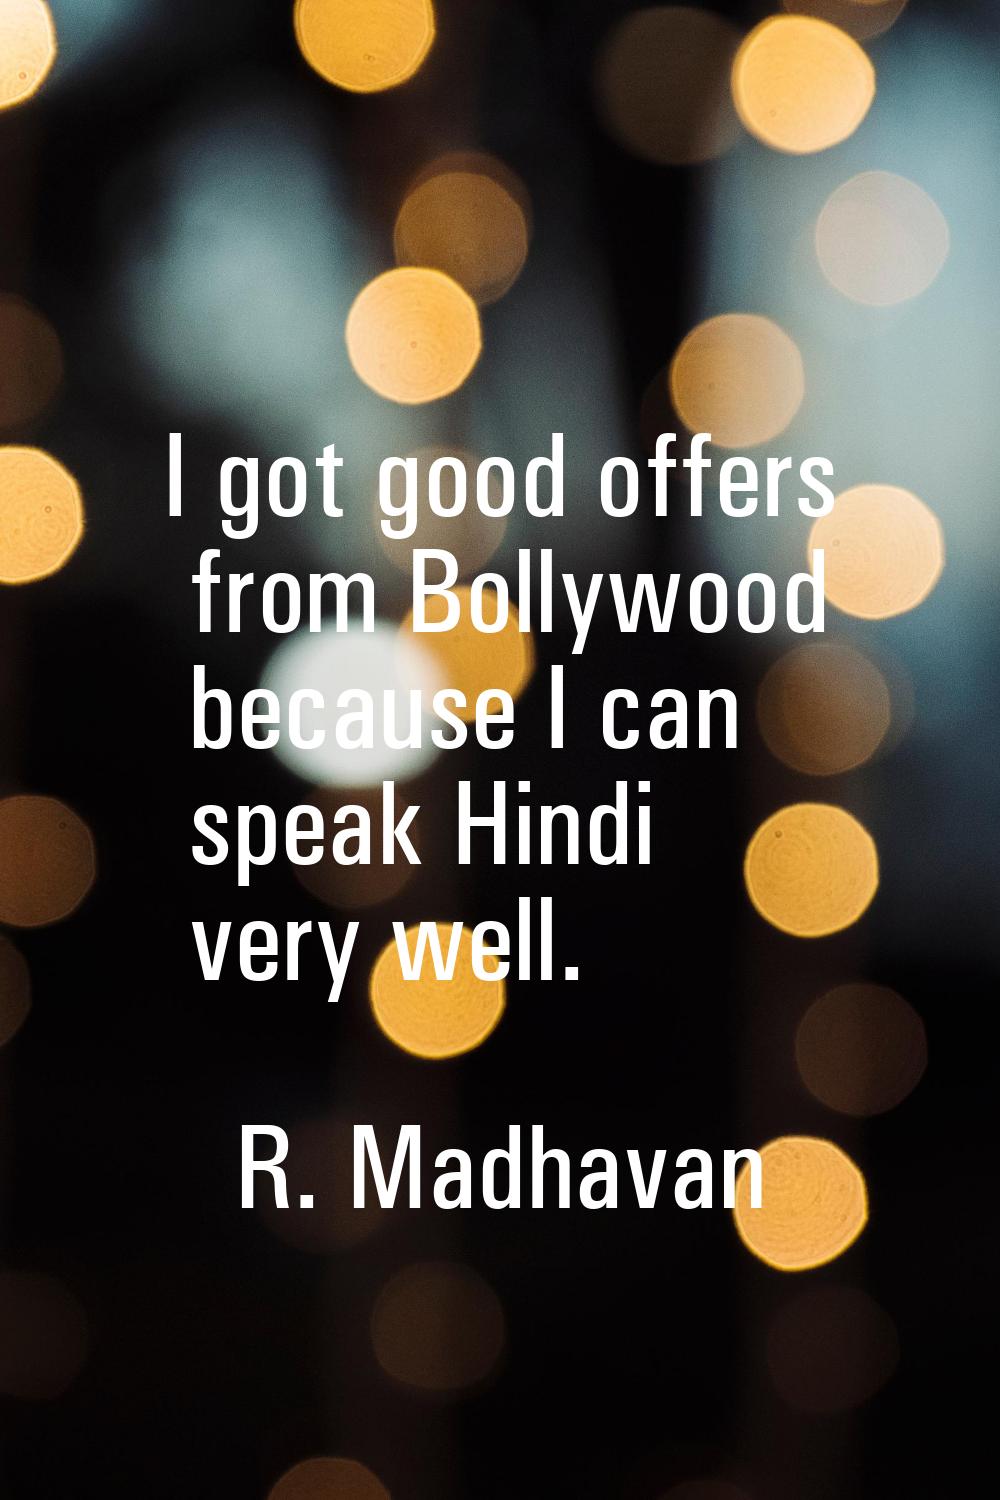 I got good offers from Bollywood because I can speak Hindi very well.